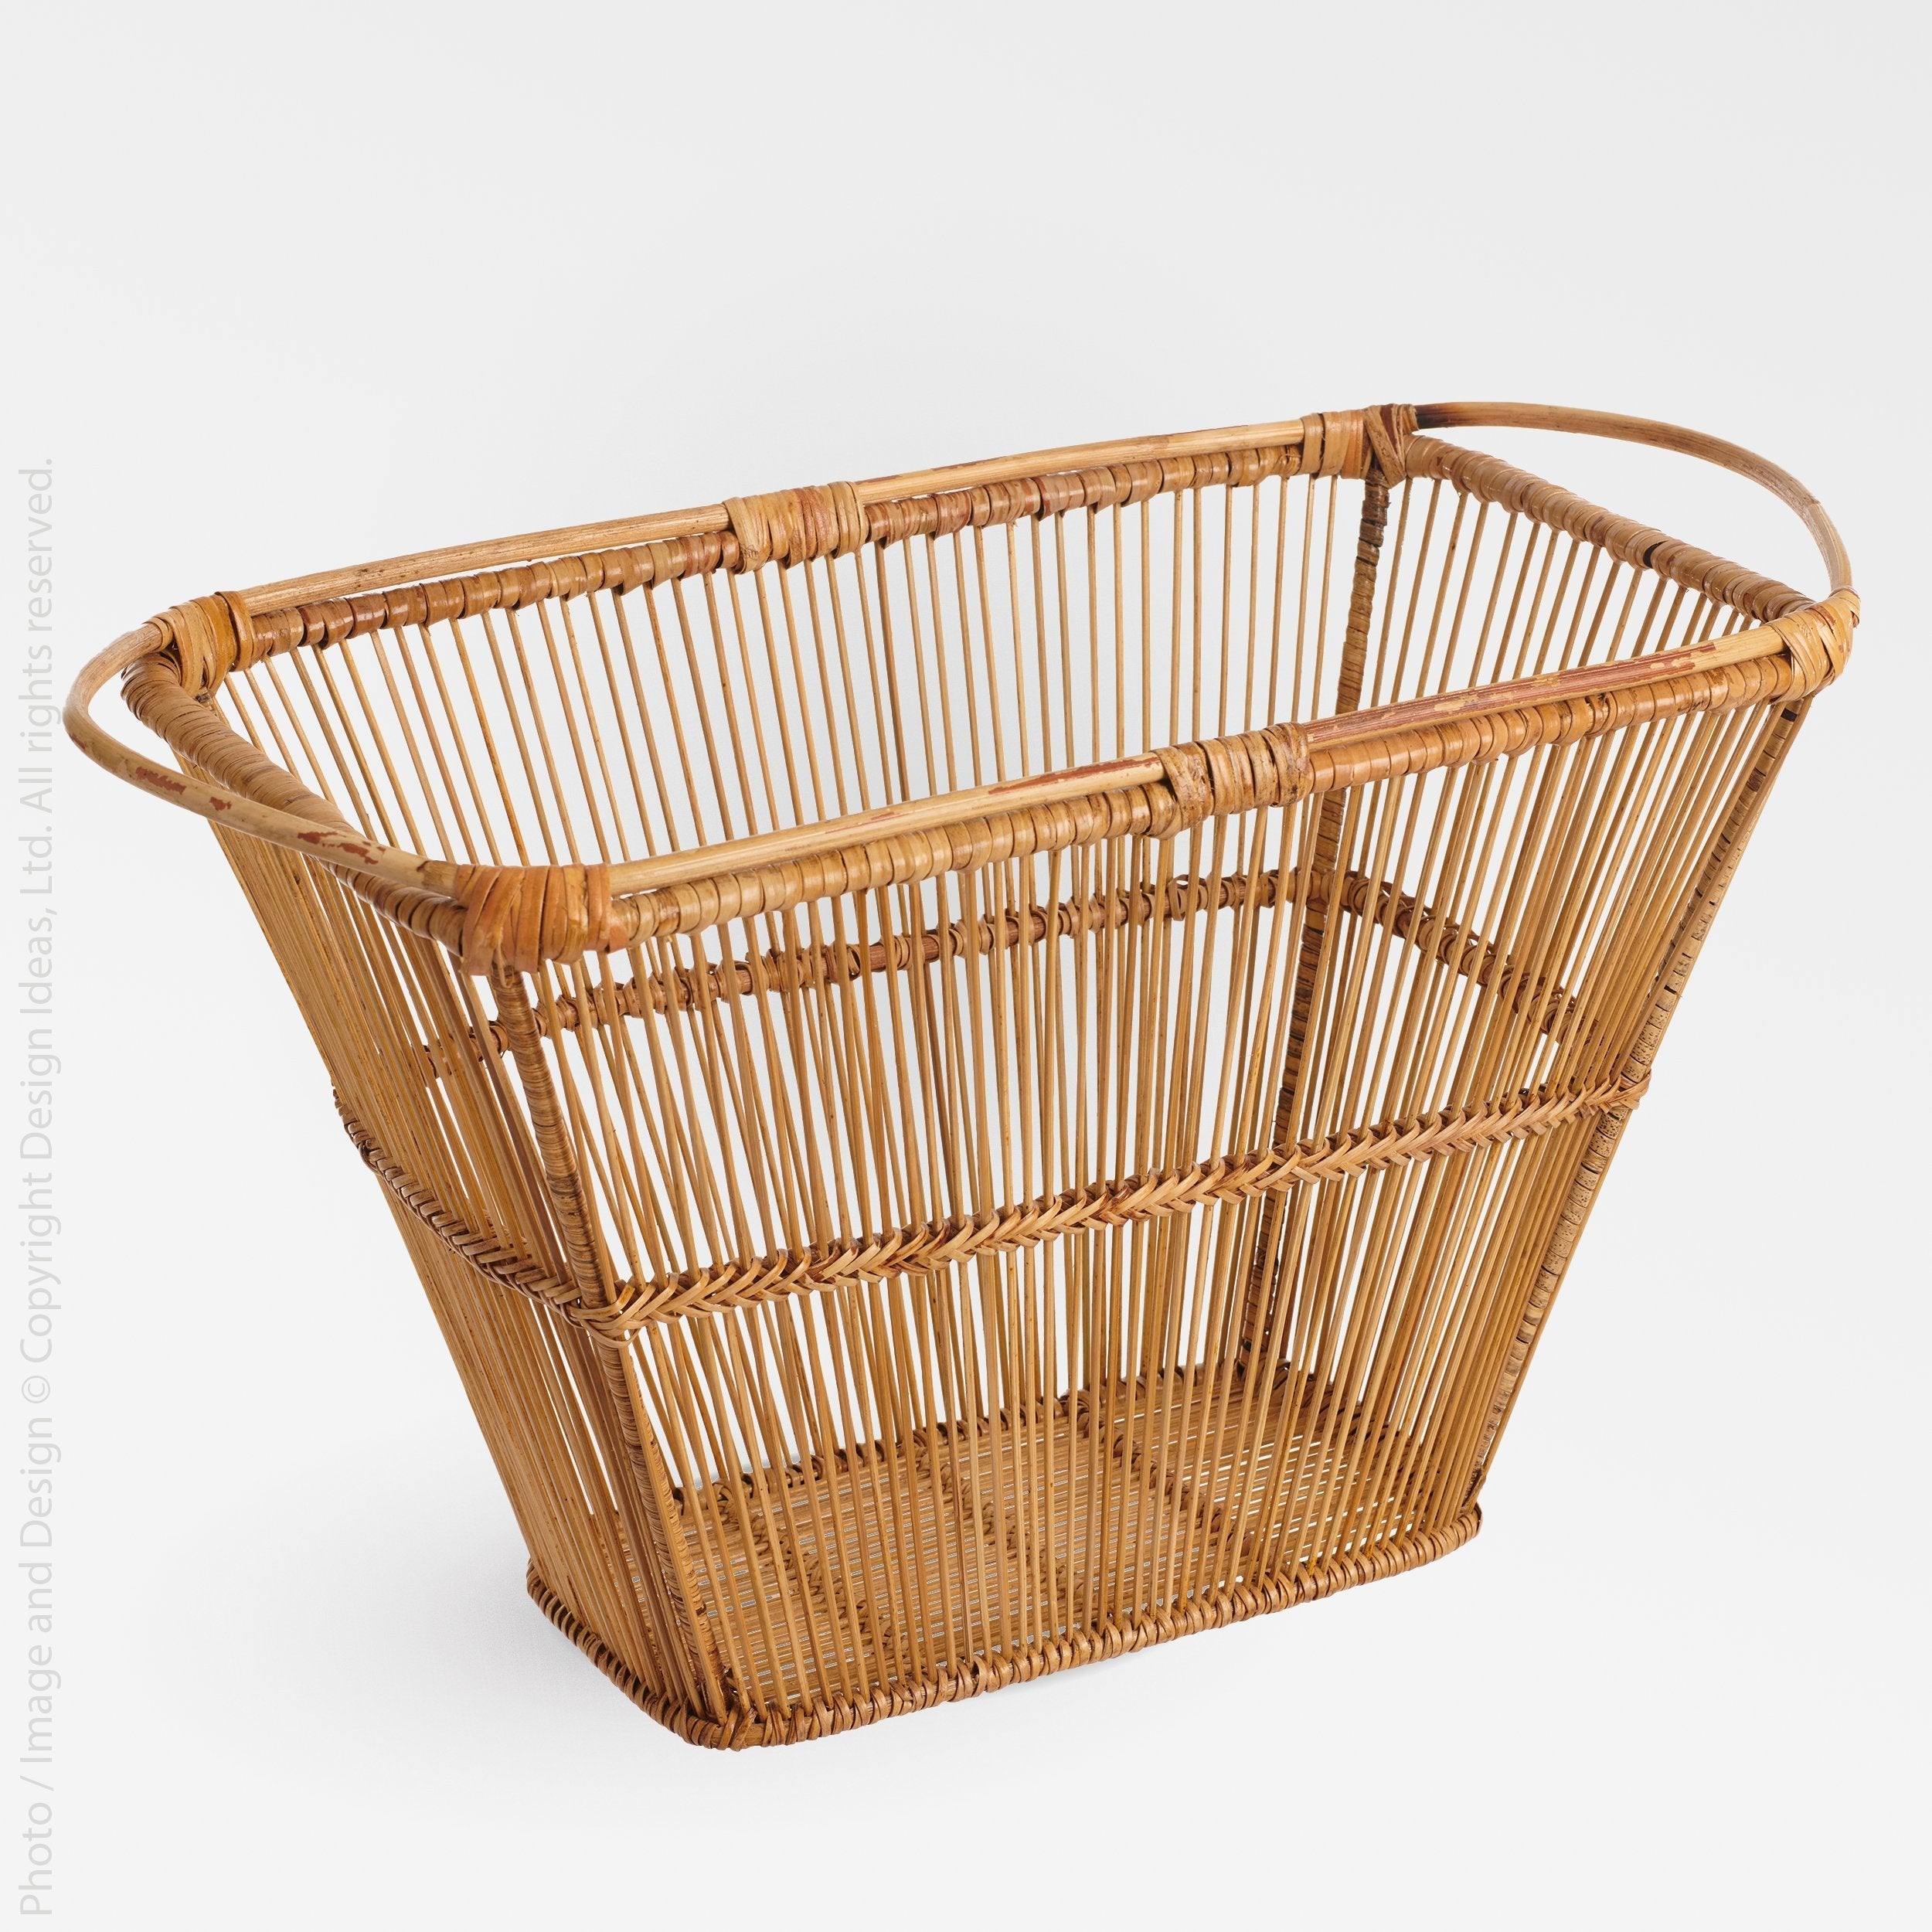 Irawaddy Bamboo Basket - Terrazzo Color | Image 1 | From the Irawaddy Collection | Skillfully handmade with natural bamboo for long lasting use | This basket is sustainably sourced | Available in natural color | texxture home